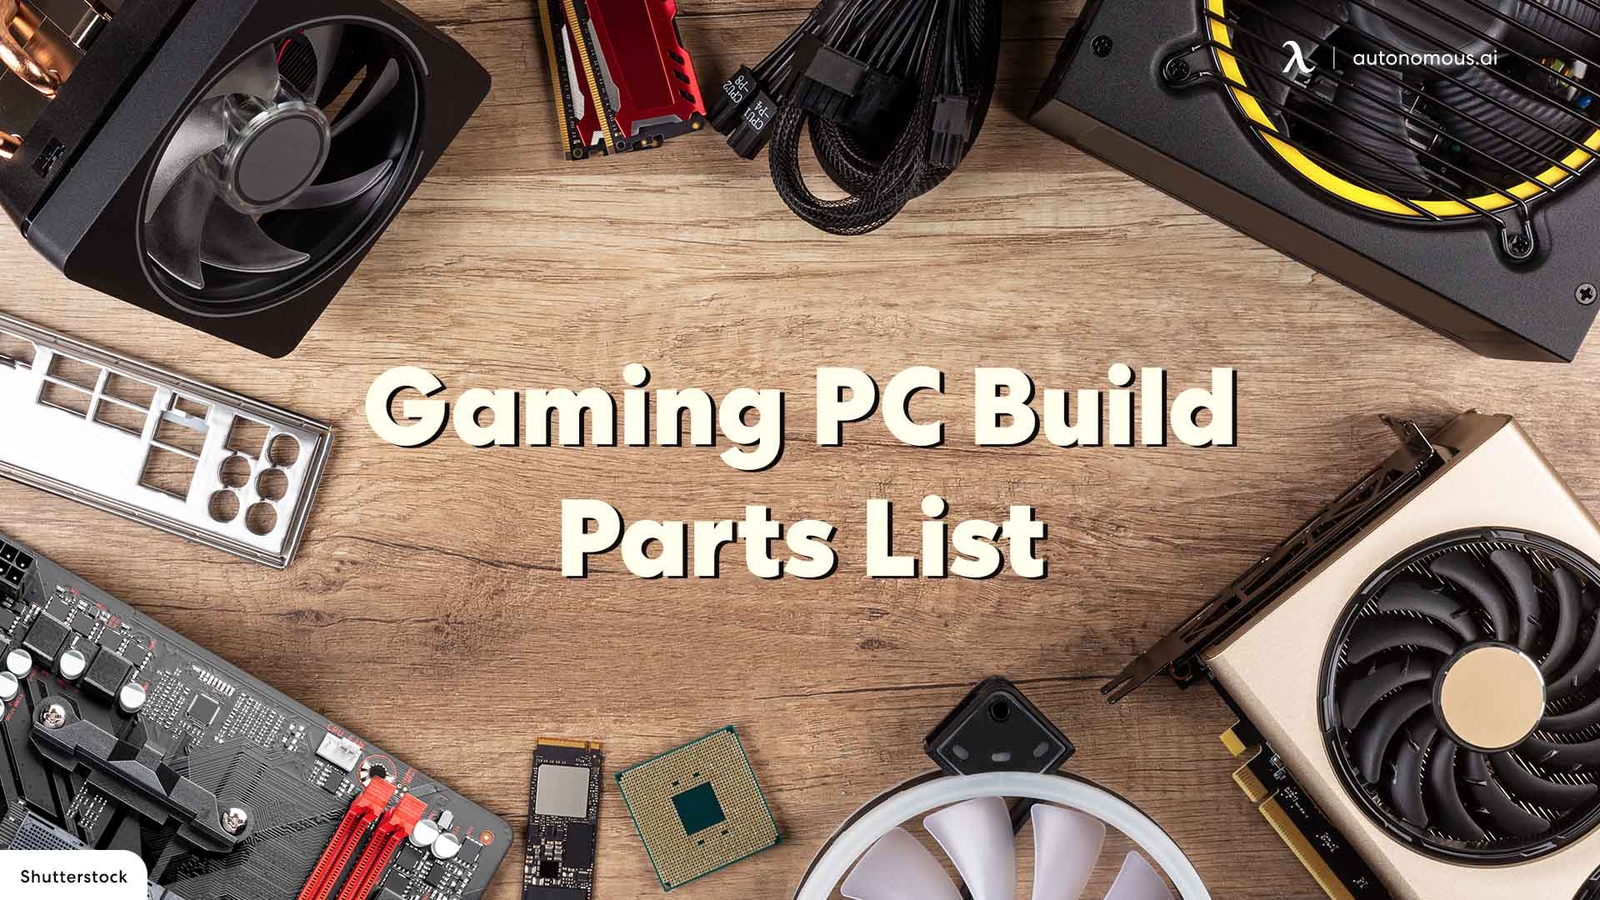 Gaming PC Build Parts List: What Do You Need?